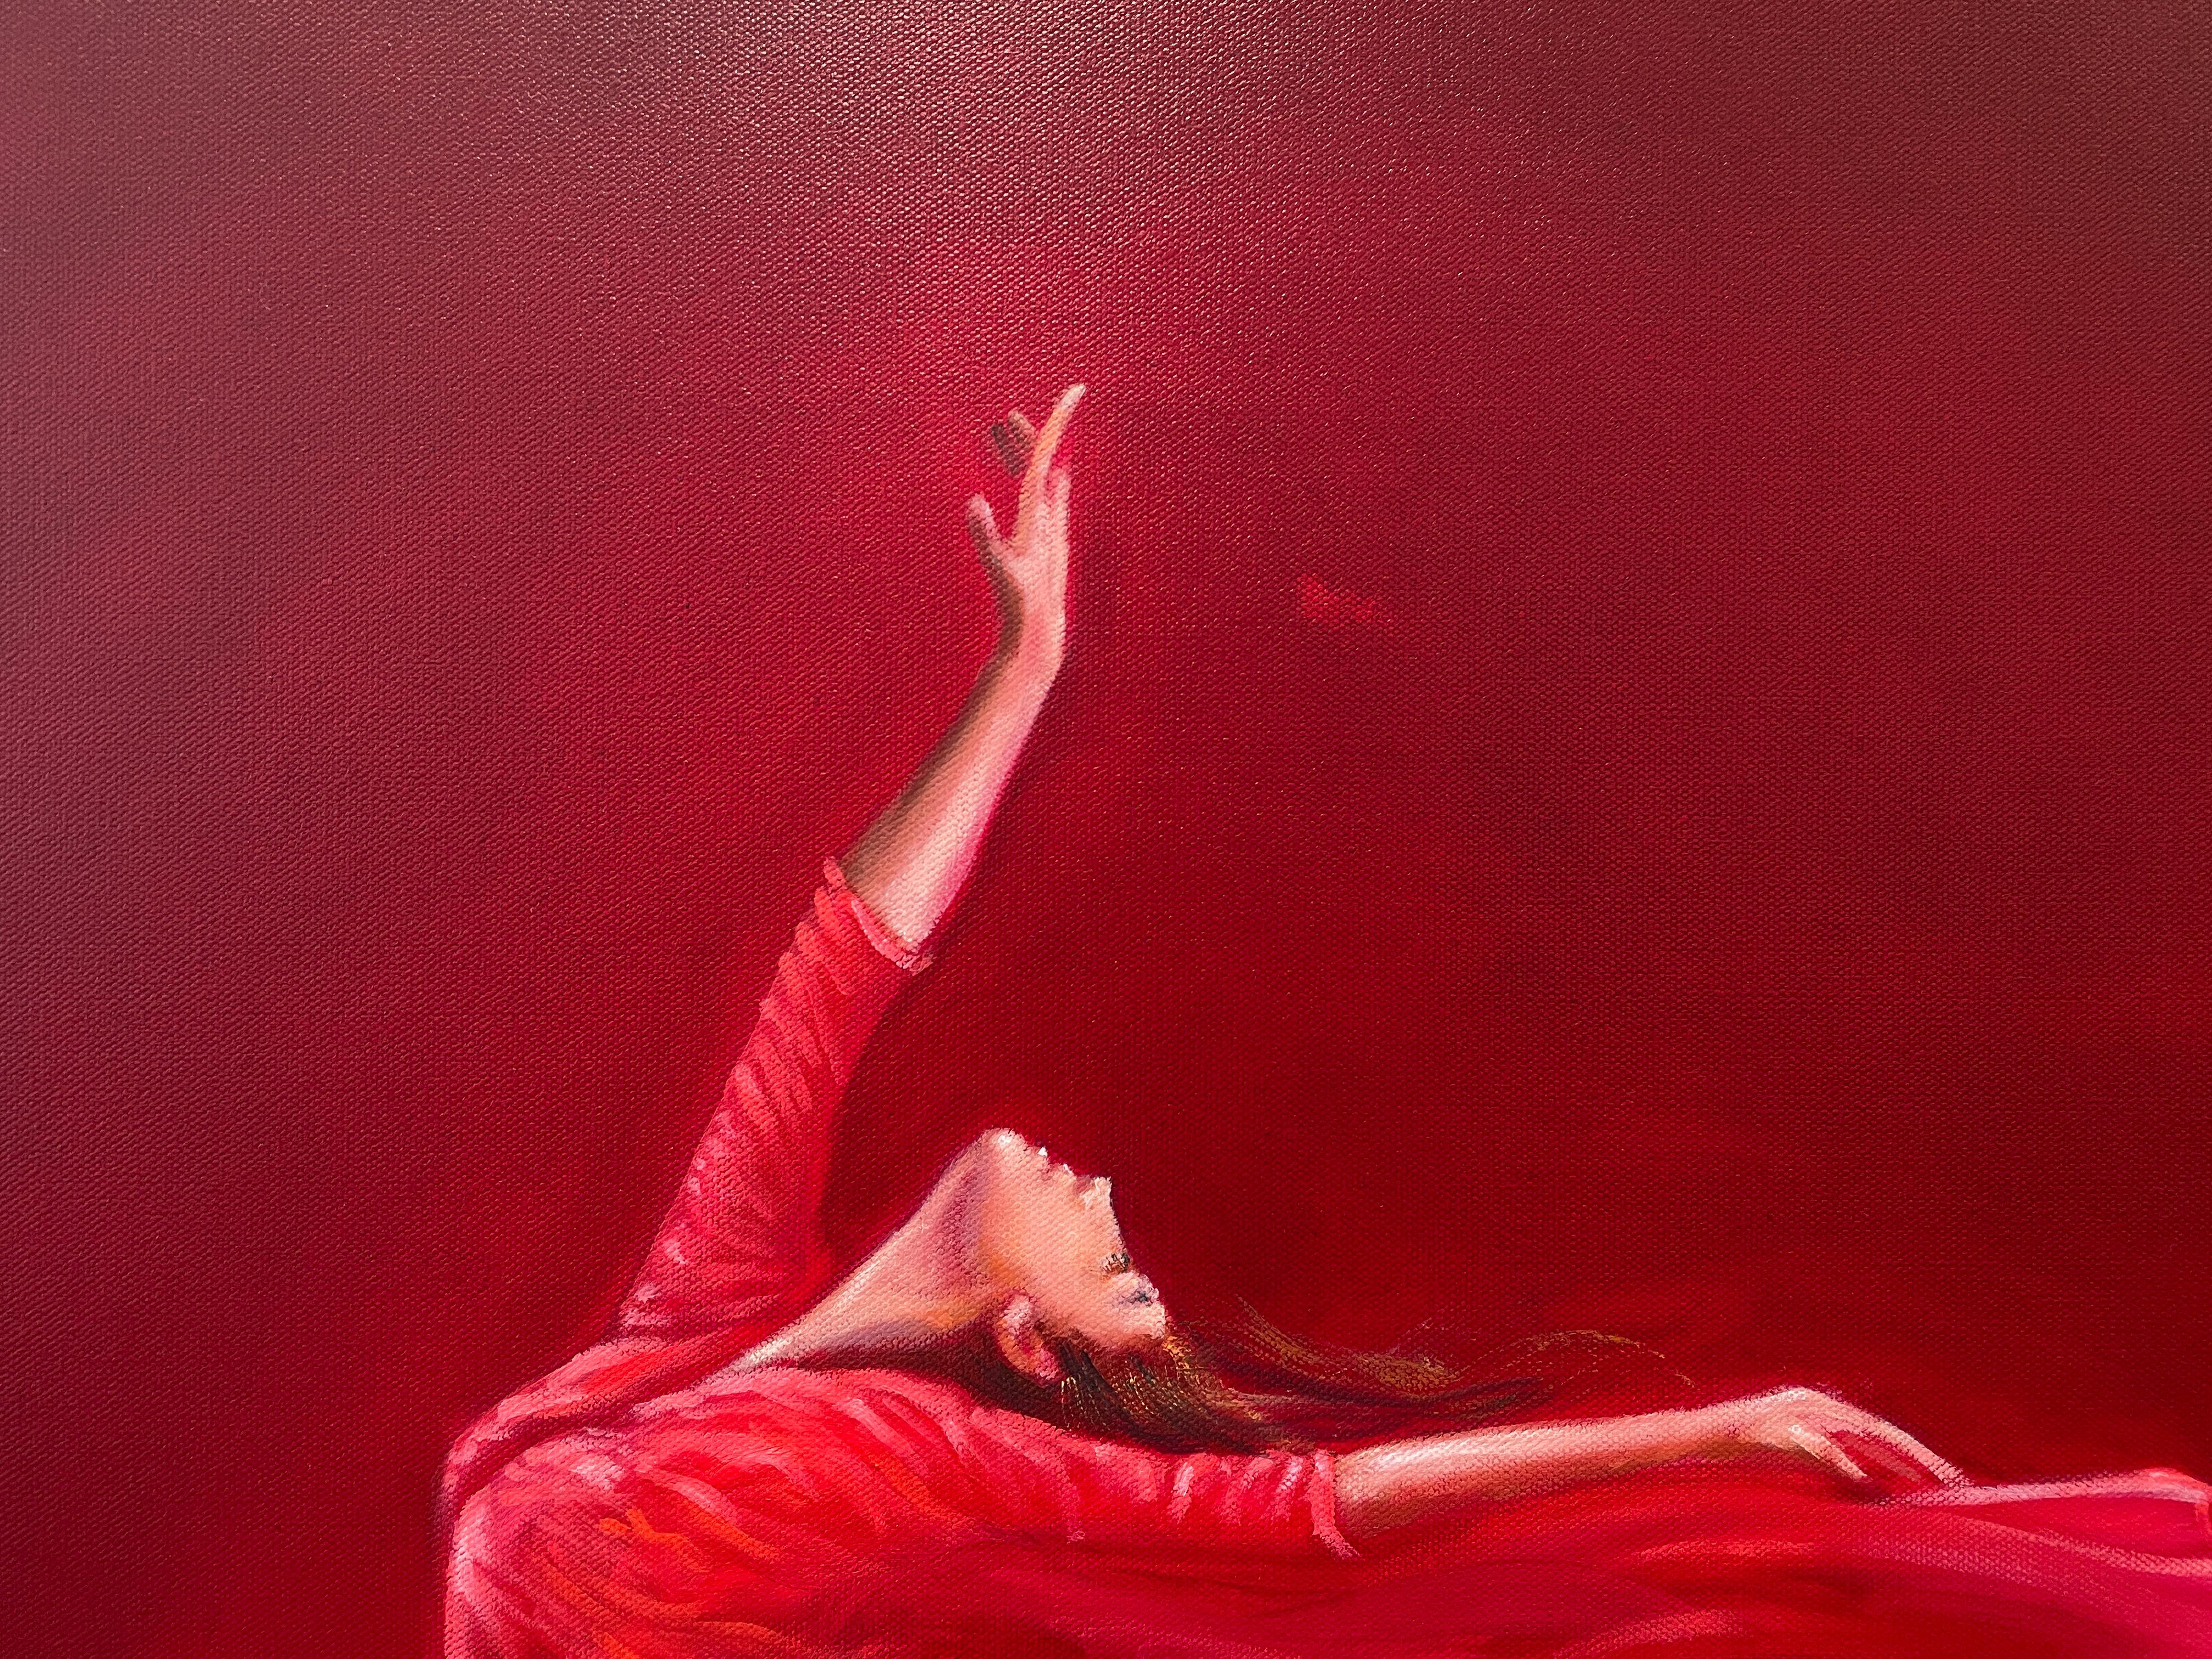 'Passione' - Ballerina in Red - The Ballet Series - Figurative Oil Painting For Sale 1